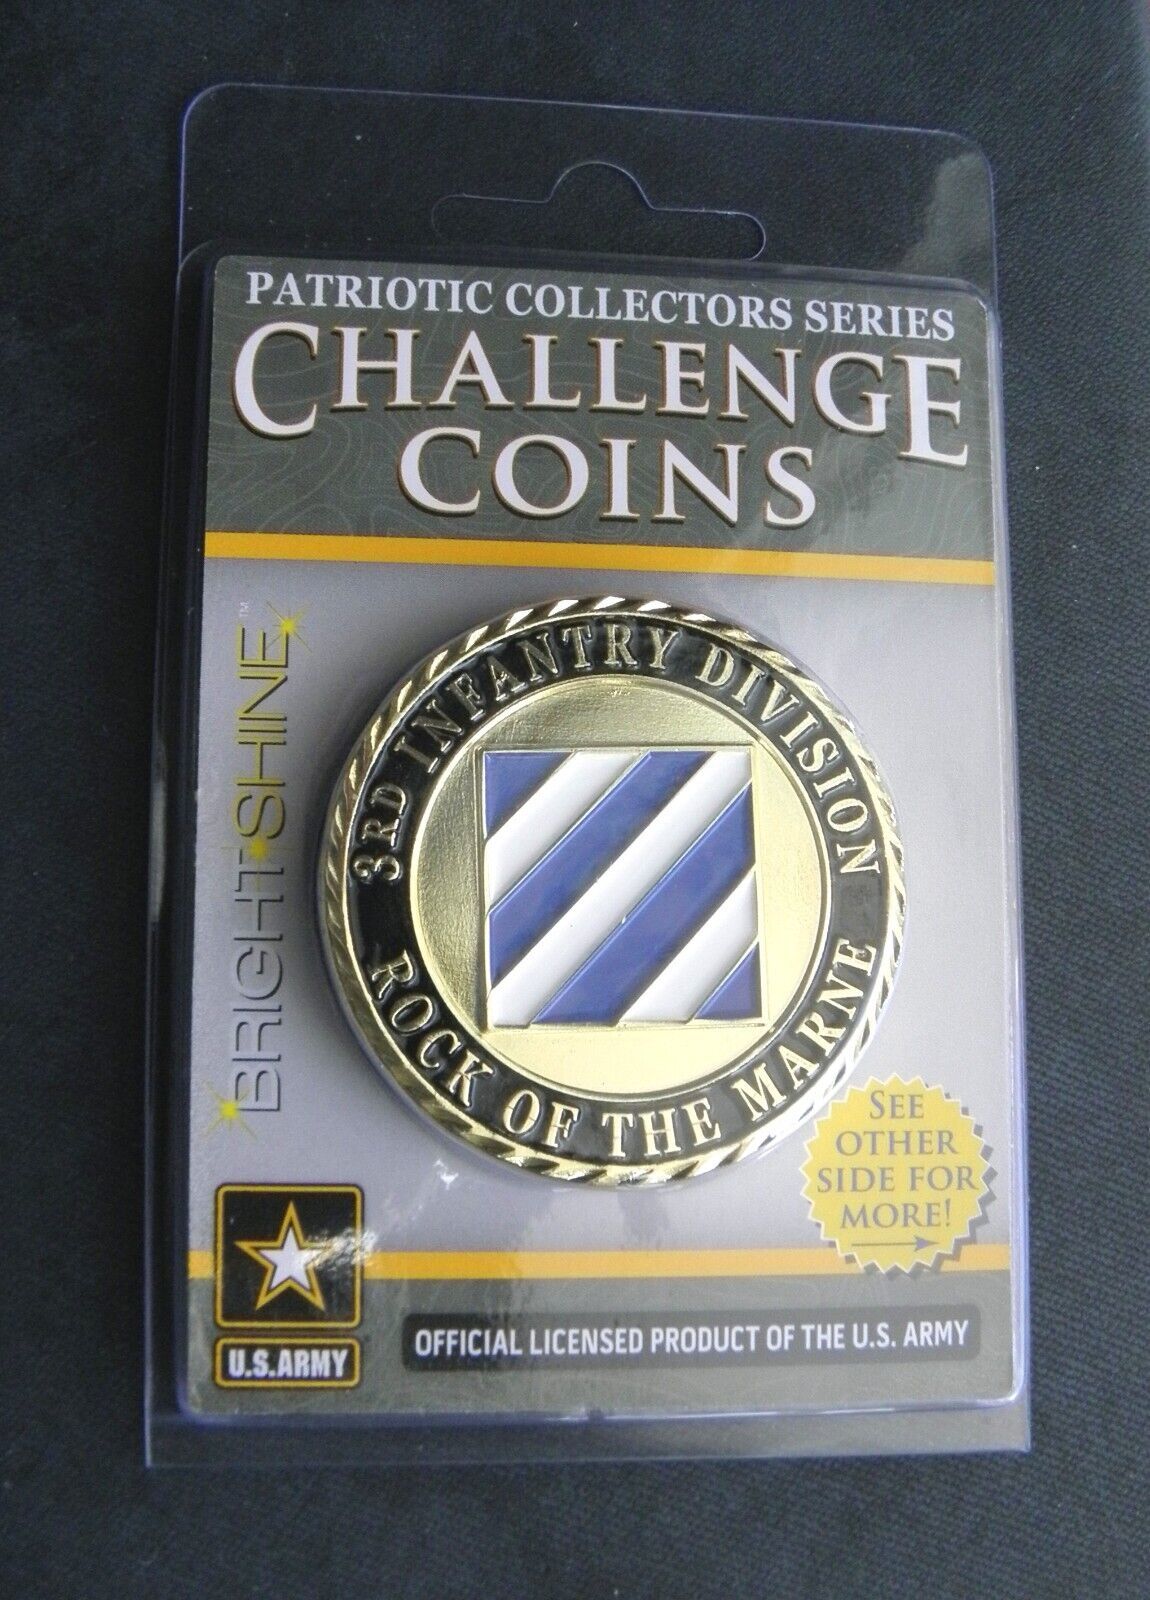 ARMY 3rd INFANTRY DIVISION PATRIOTIC SERIES CHALLENGE COIN 1.75 INCHES NEW CASE - $10.95